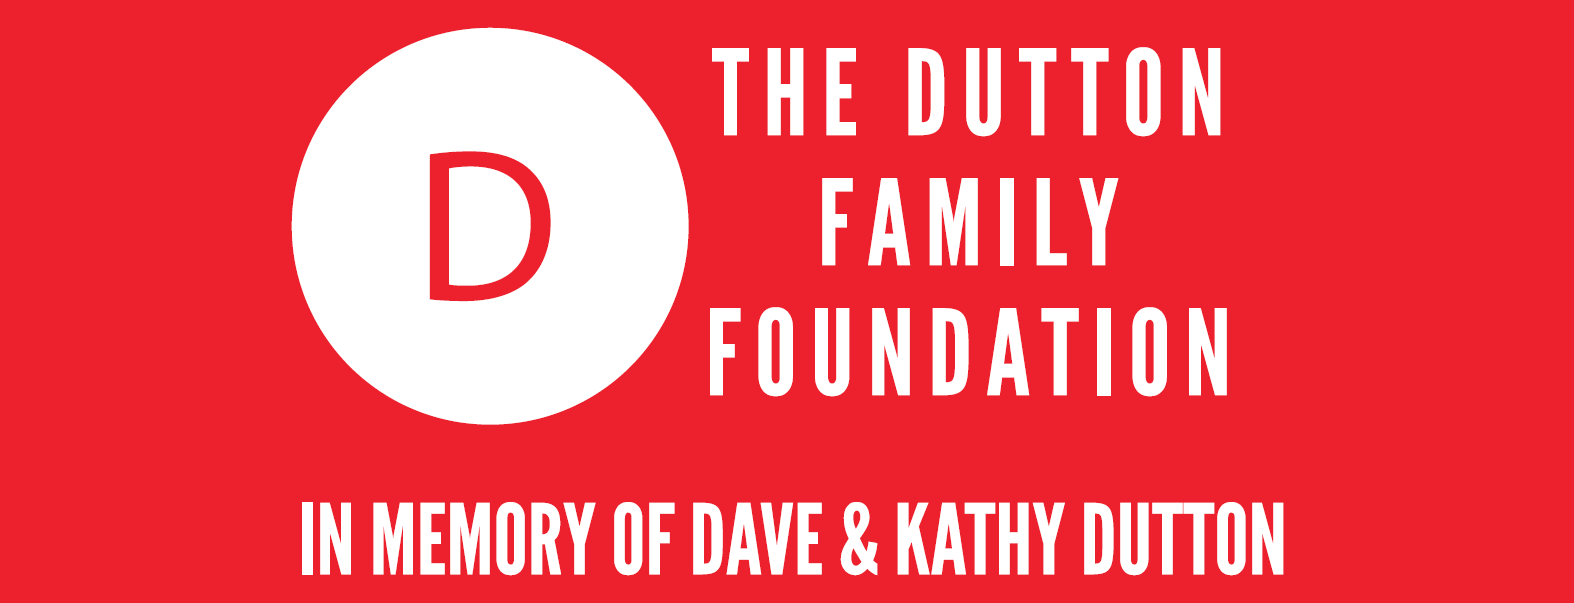 The Dutton Family Foundation - 3rd Annual Golf Tournament